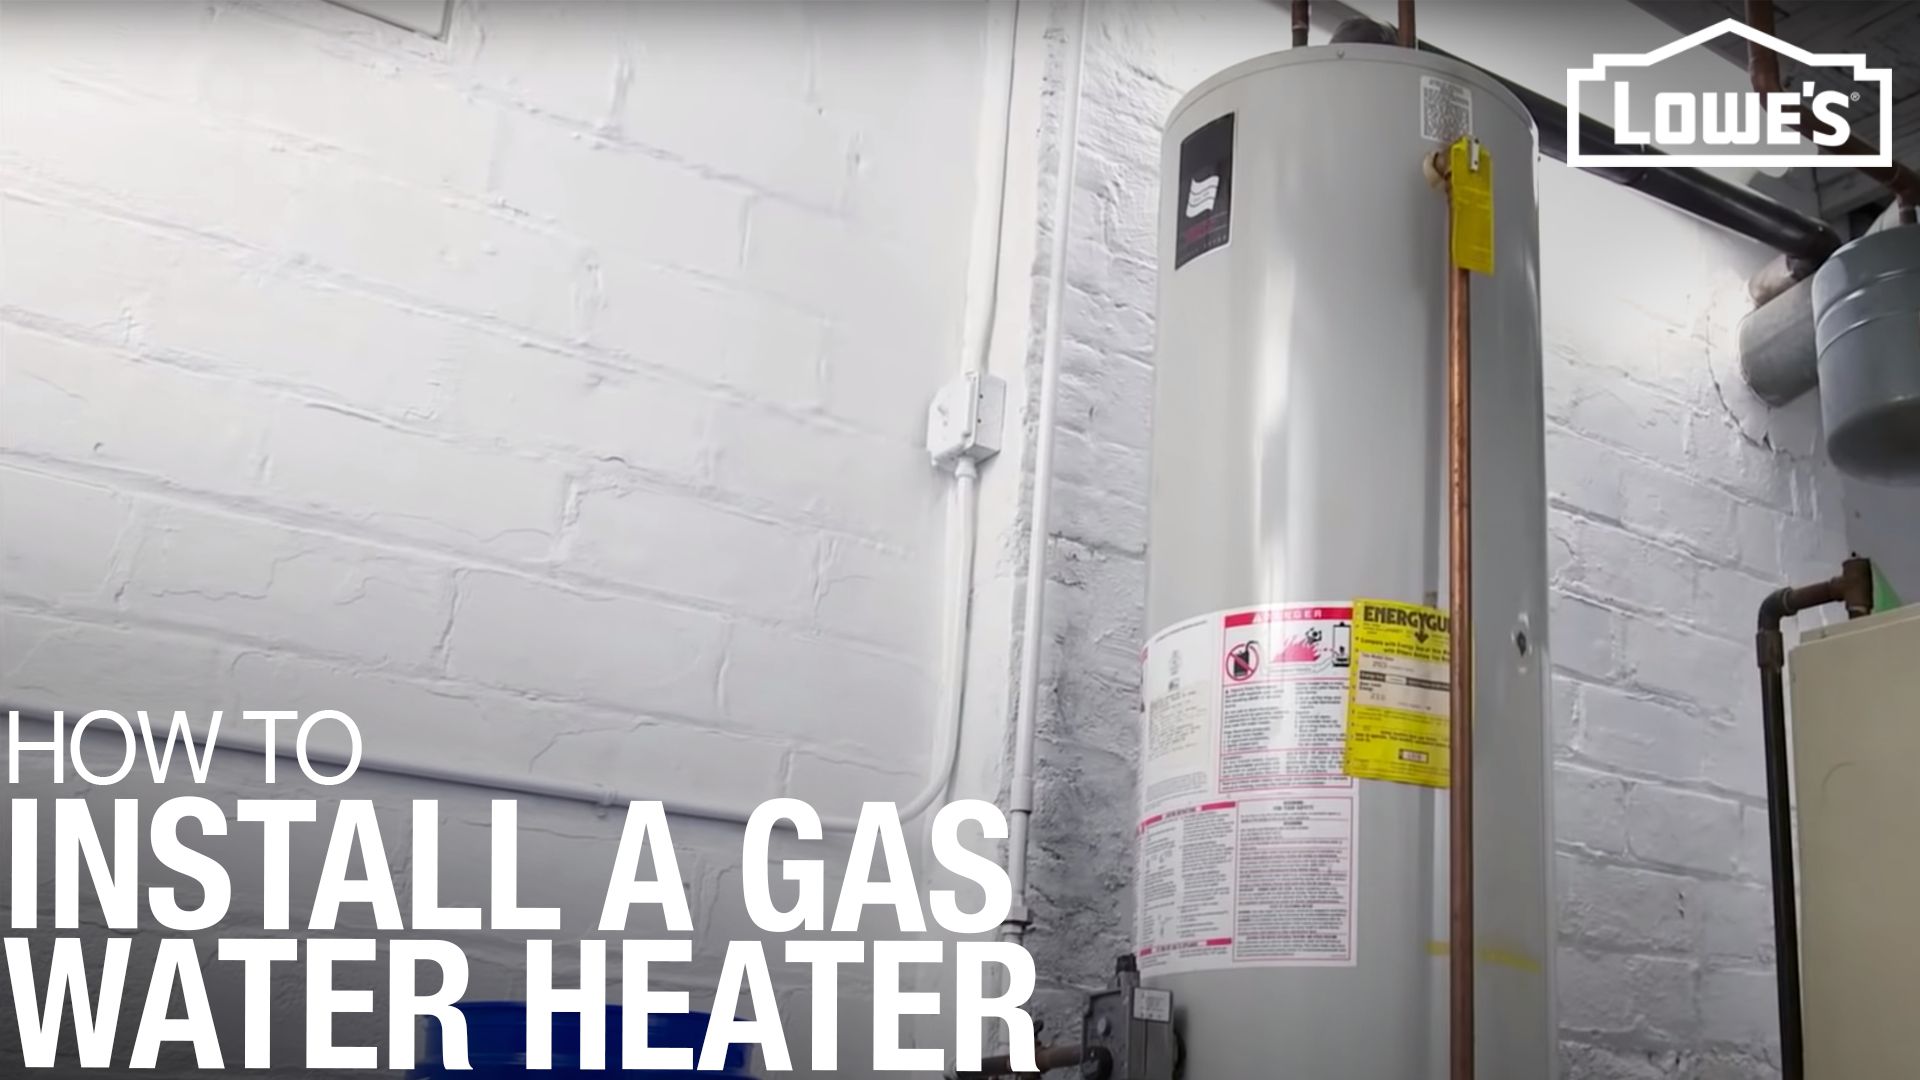 How to Install a Gas Water Heater